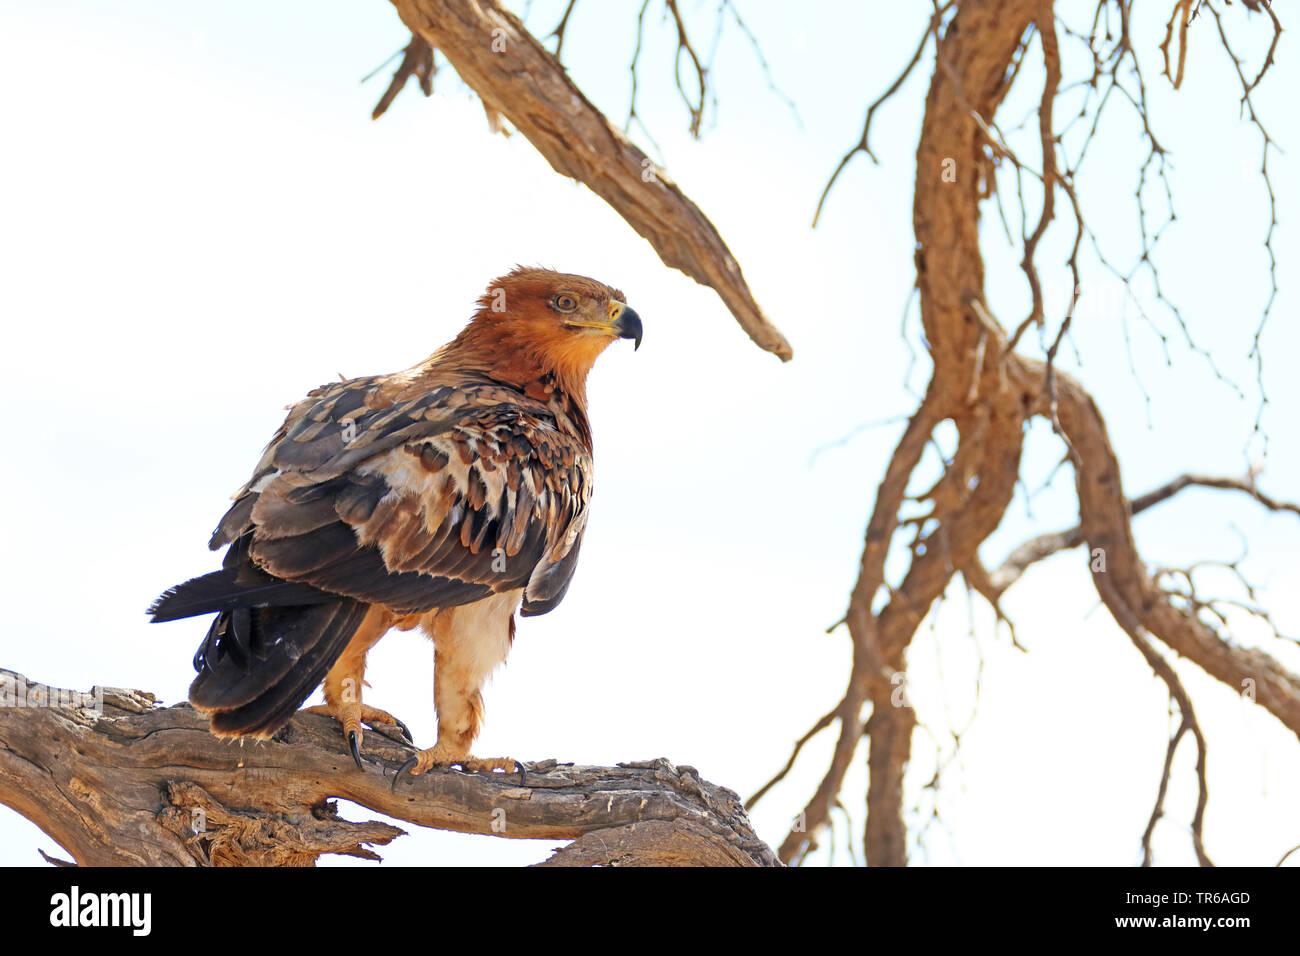 tawny eagle (Aquila rapax), juvenile sitting on a branch, South Africa, Kgalagadi Transfrontier National Park Stock Photo